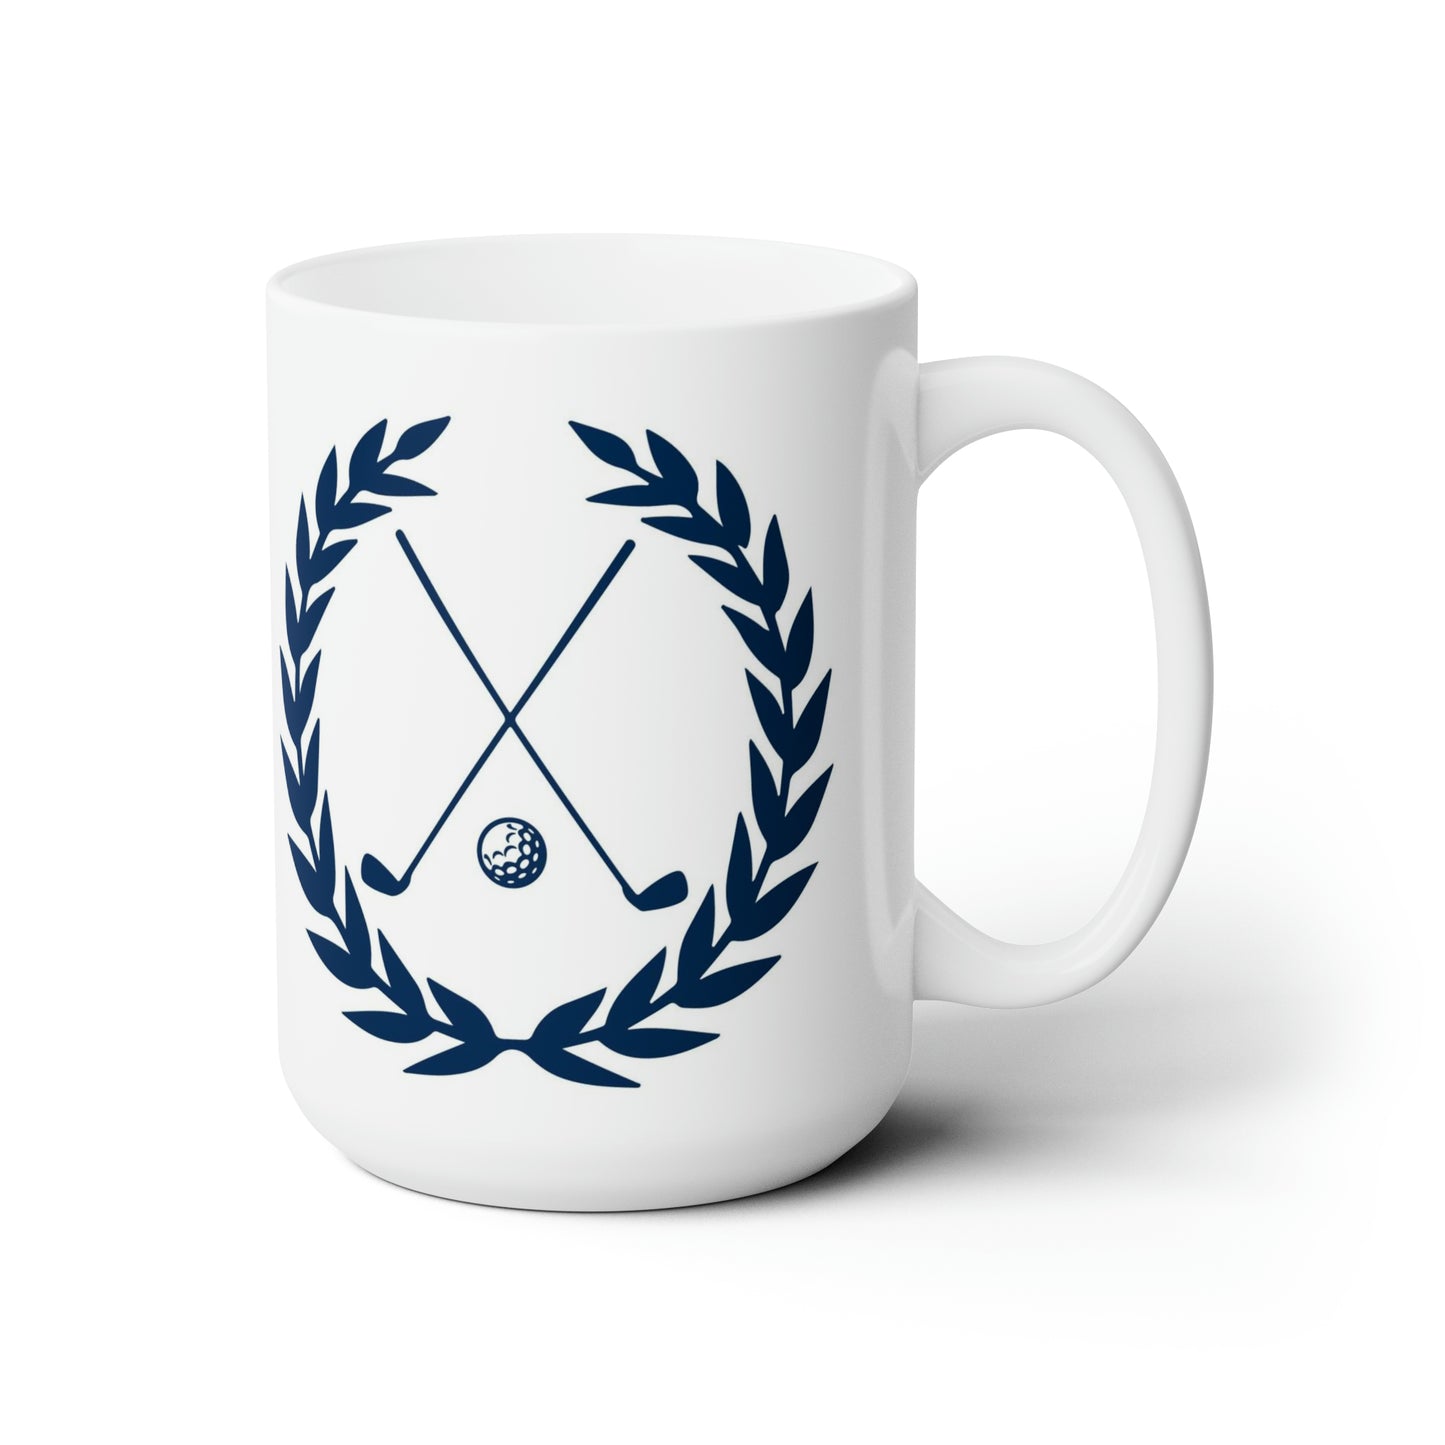 Golf Champion Ceramic Mug - Available In 3 Colors